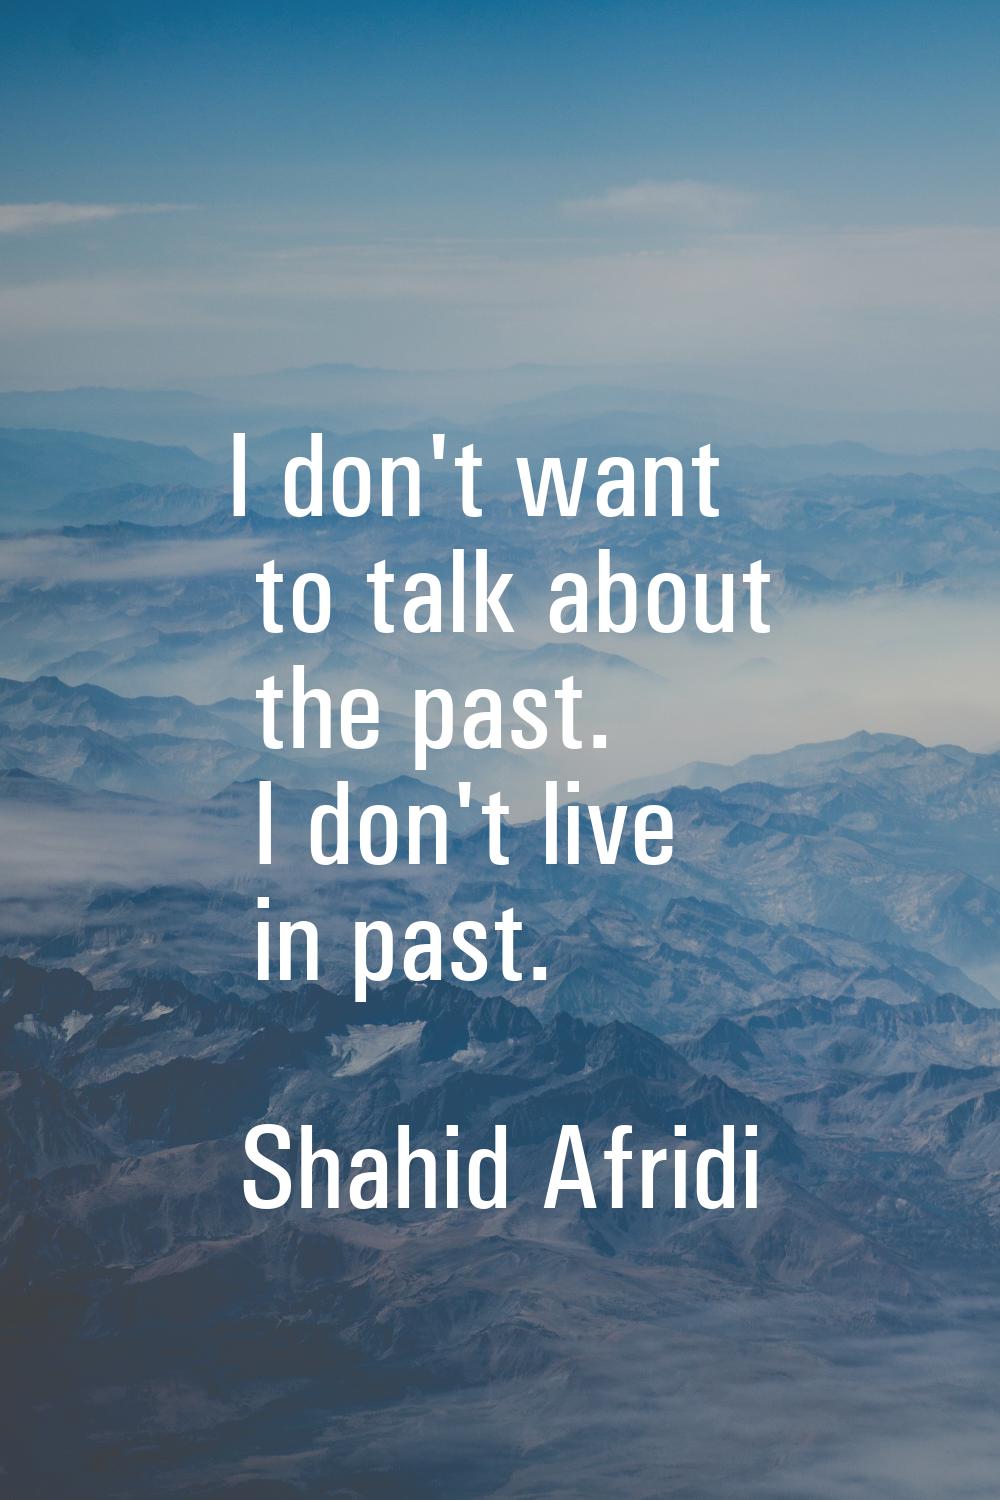 I don't want to talk about the past. I don't live in past.